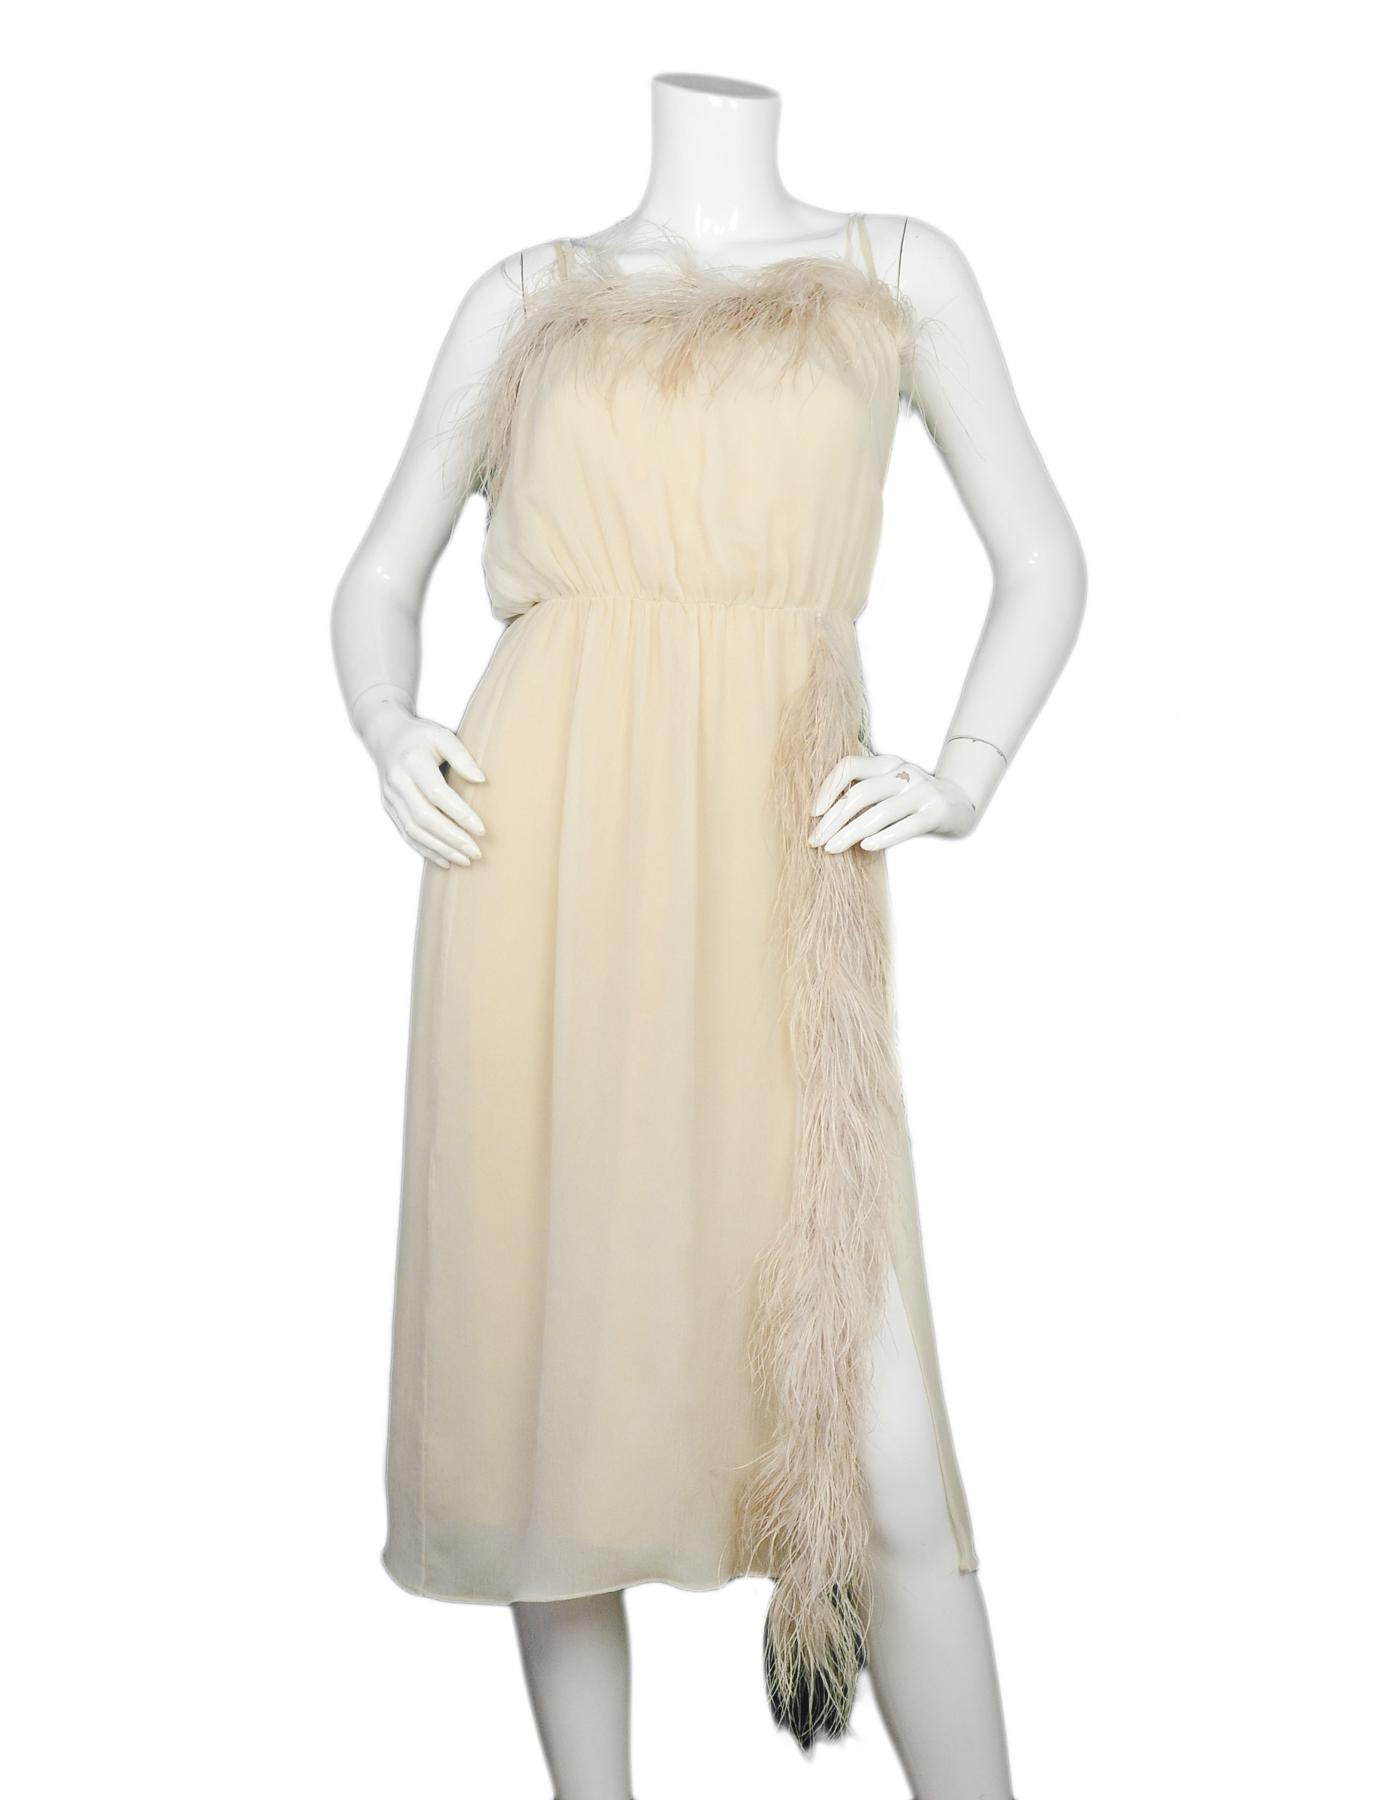 Prada Beige Silk Dress W/ Feather Trim IT38/US2

Made In: Italy
Color: Beige
Materials: 100% silk, feathers 
Lining: Attached silk slip
Opening/Closure: Pull over
Overall Condition: Excellent pre-owned condition 

Tag Size: IT38/US2
Shoulder To